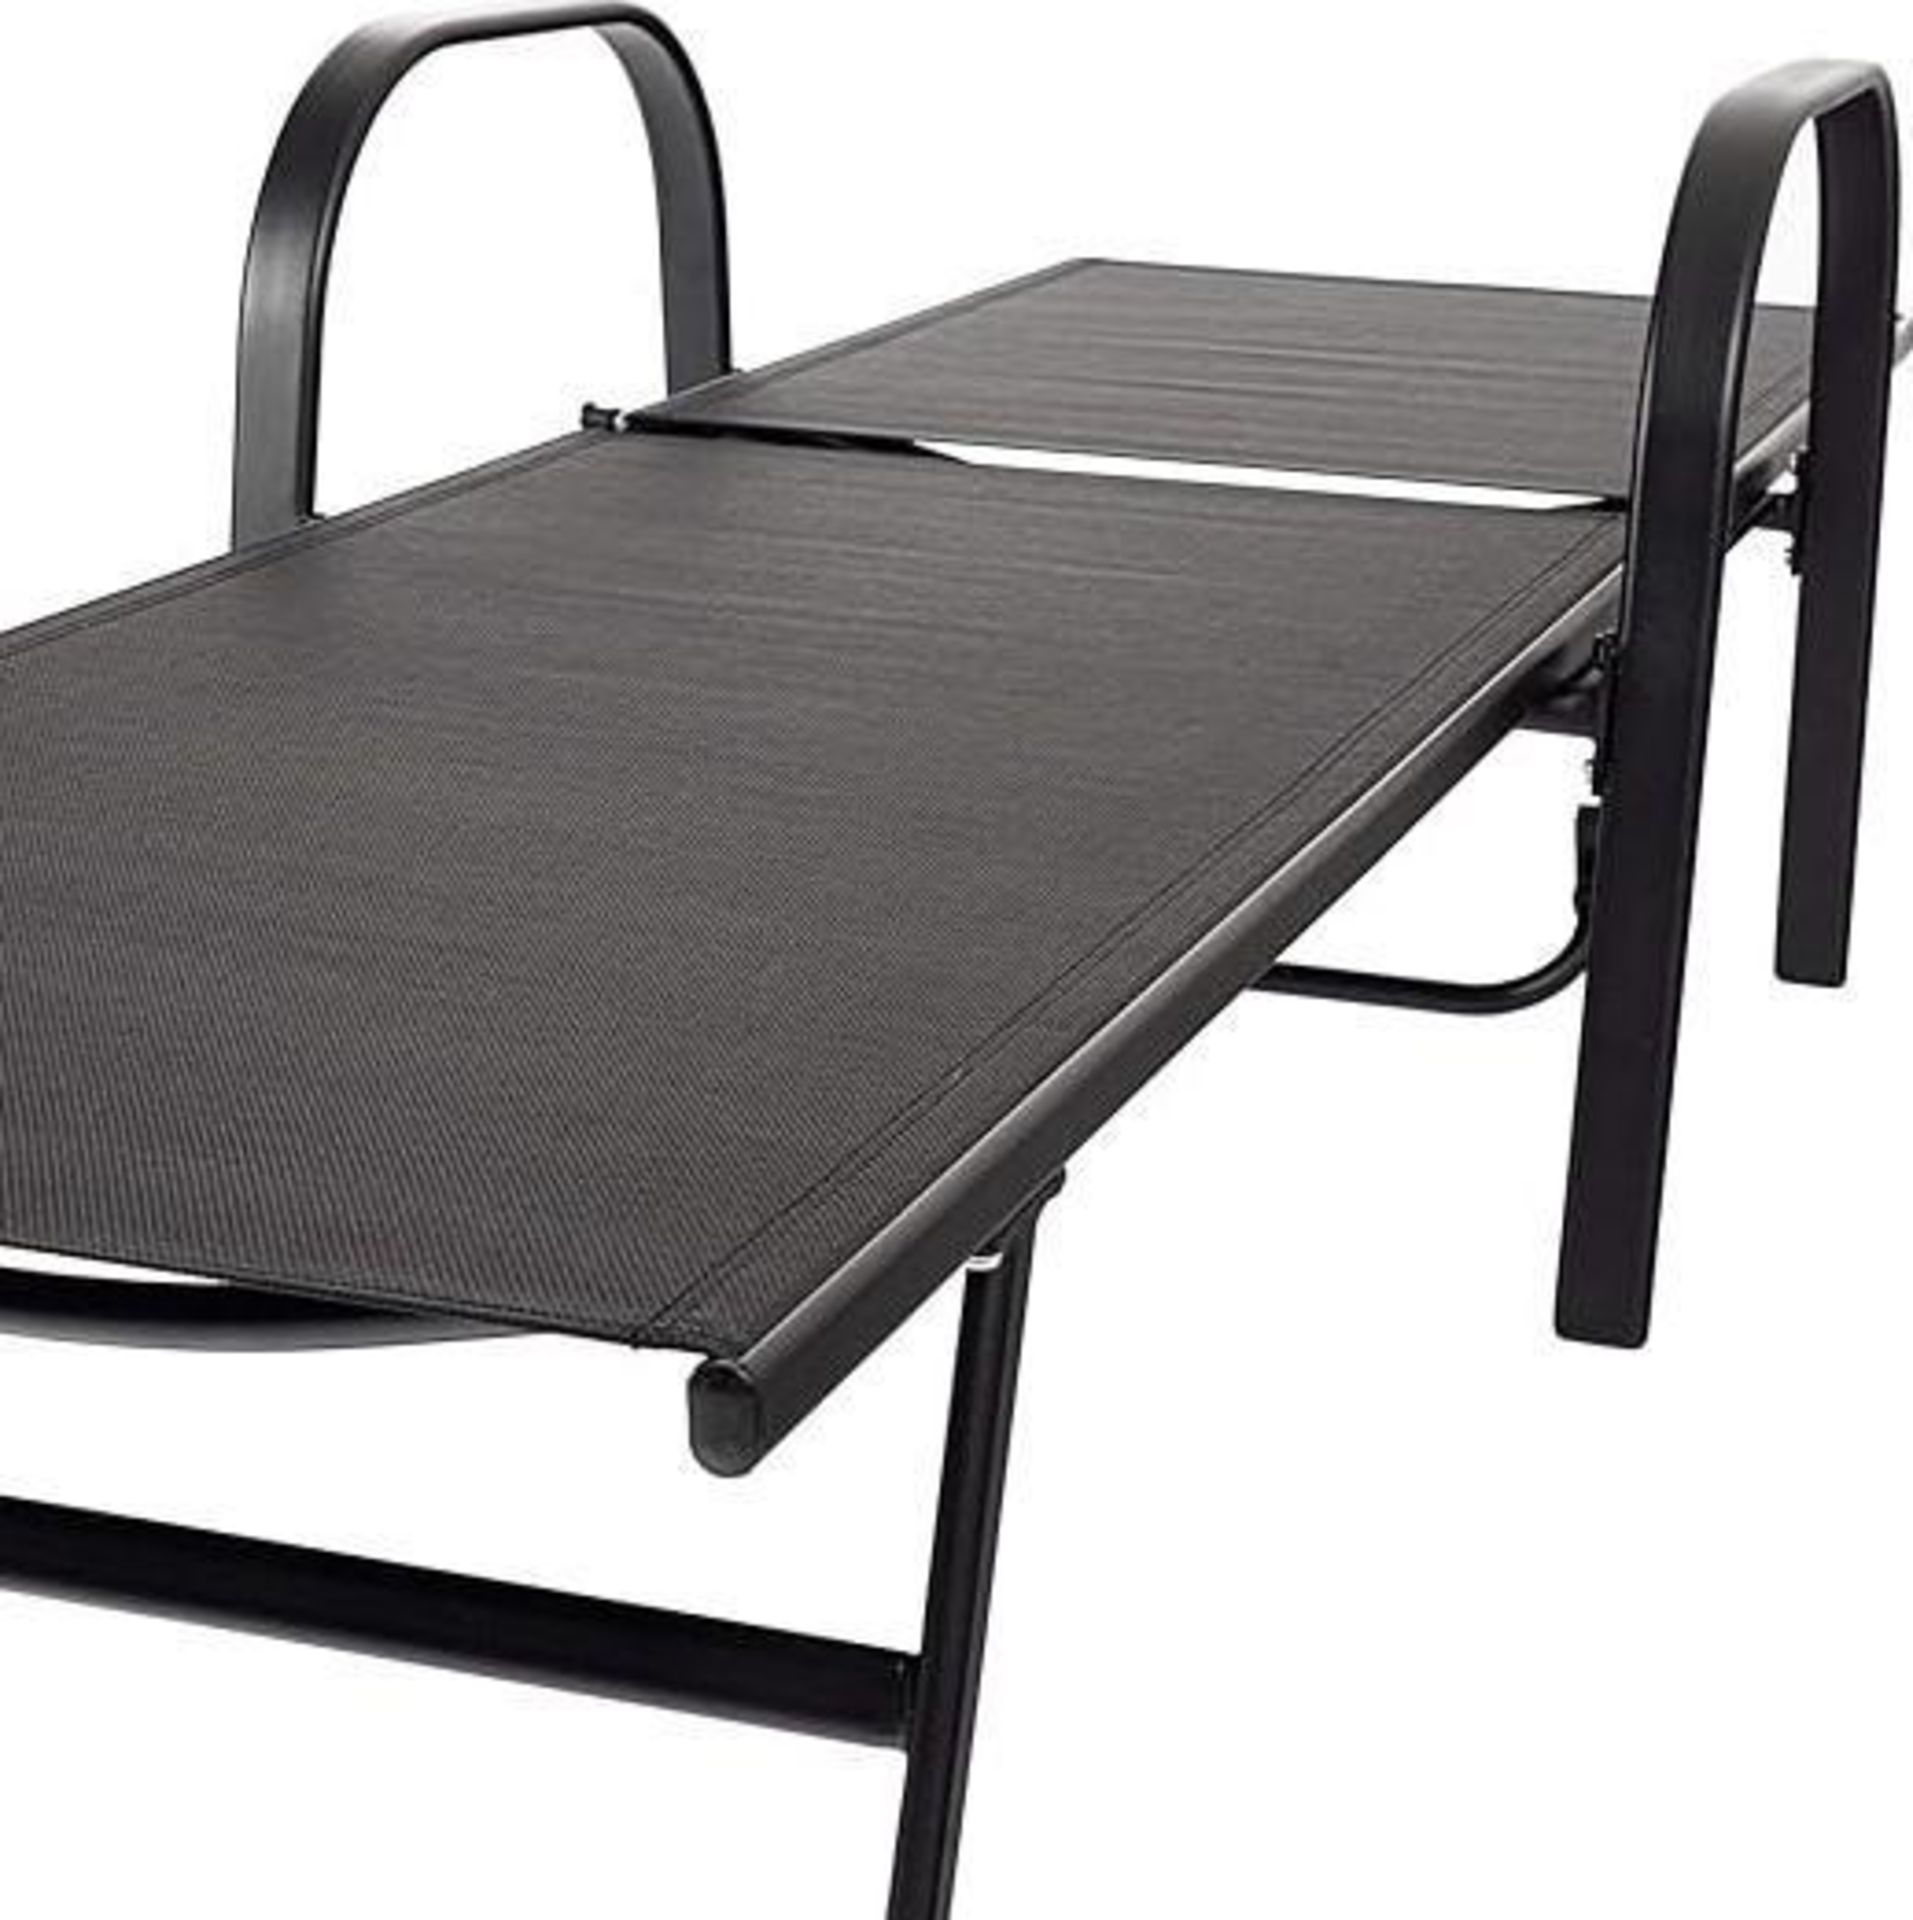 BRAND NEW & BOXED Adjustable Reclining Outdoor Patio Sun Lounger in Black - Image 6 of 6